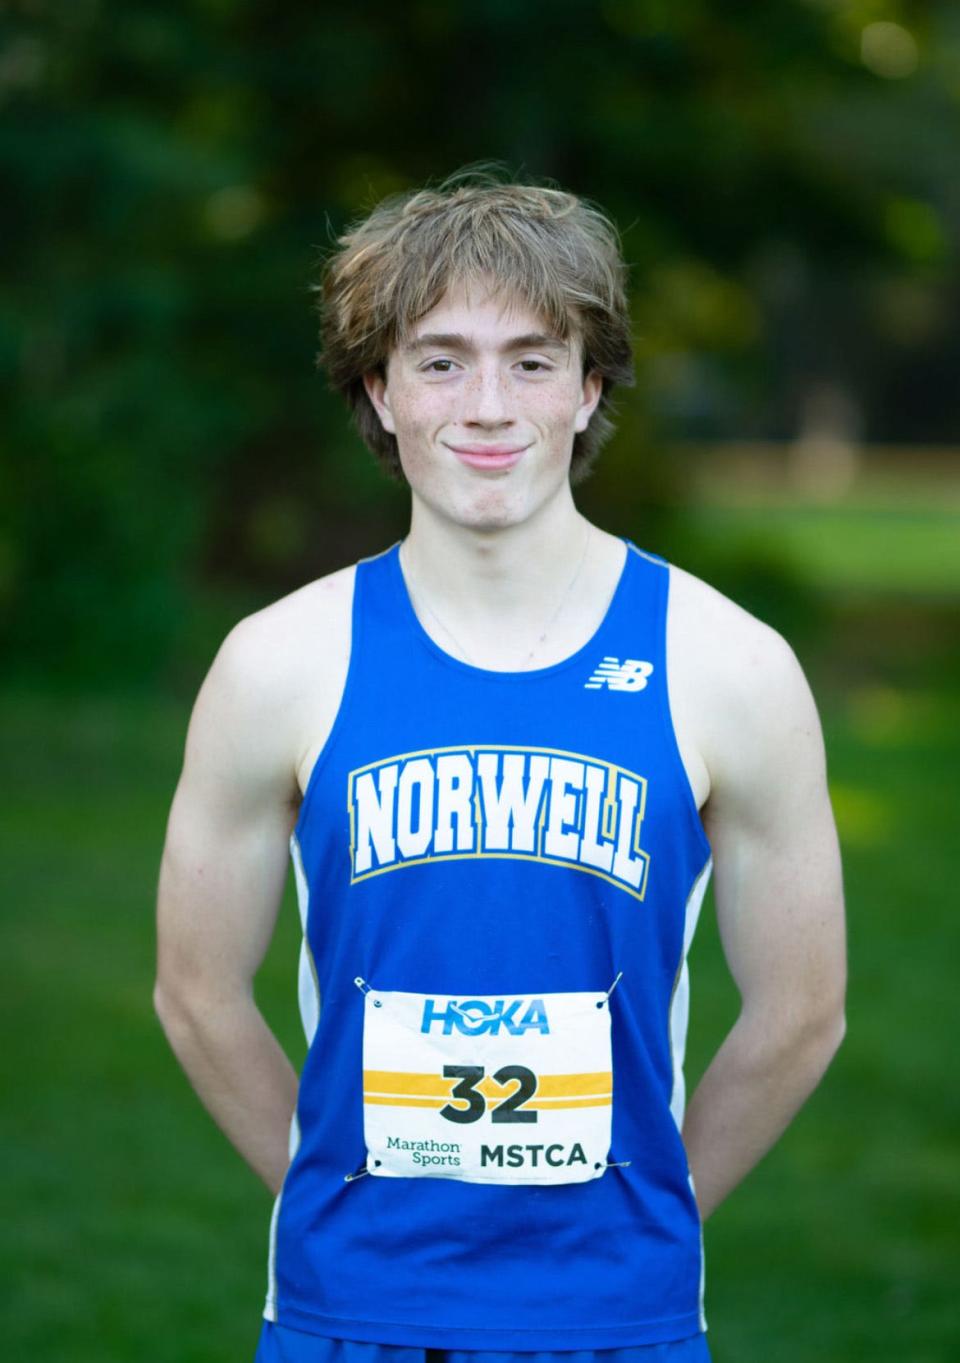 Jack Twombly of Norwell has been named to The Patriot Ledger/Enterprise All-Scholastic Boys Cross Country Team.